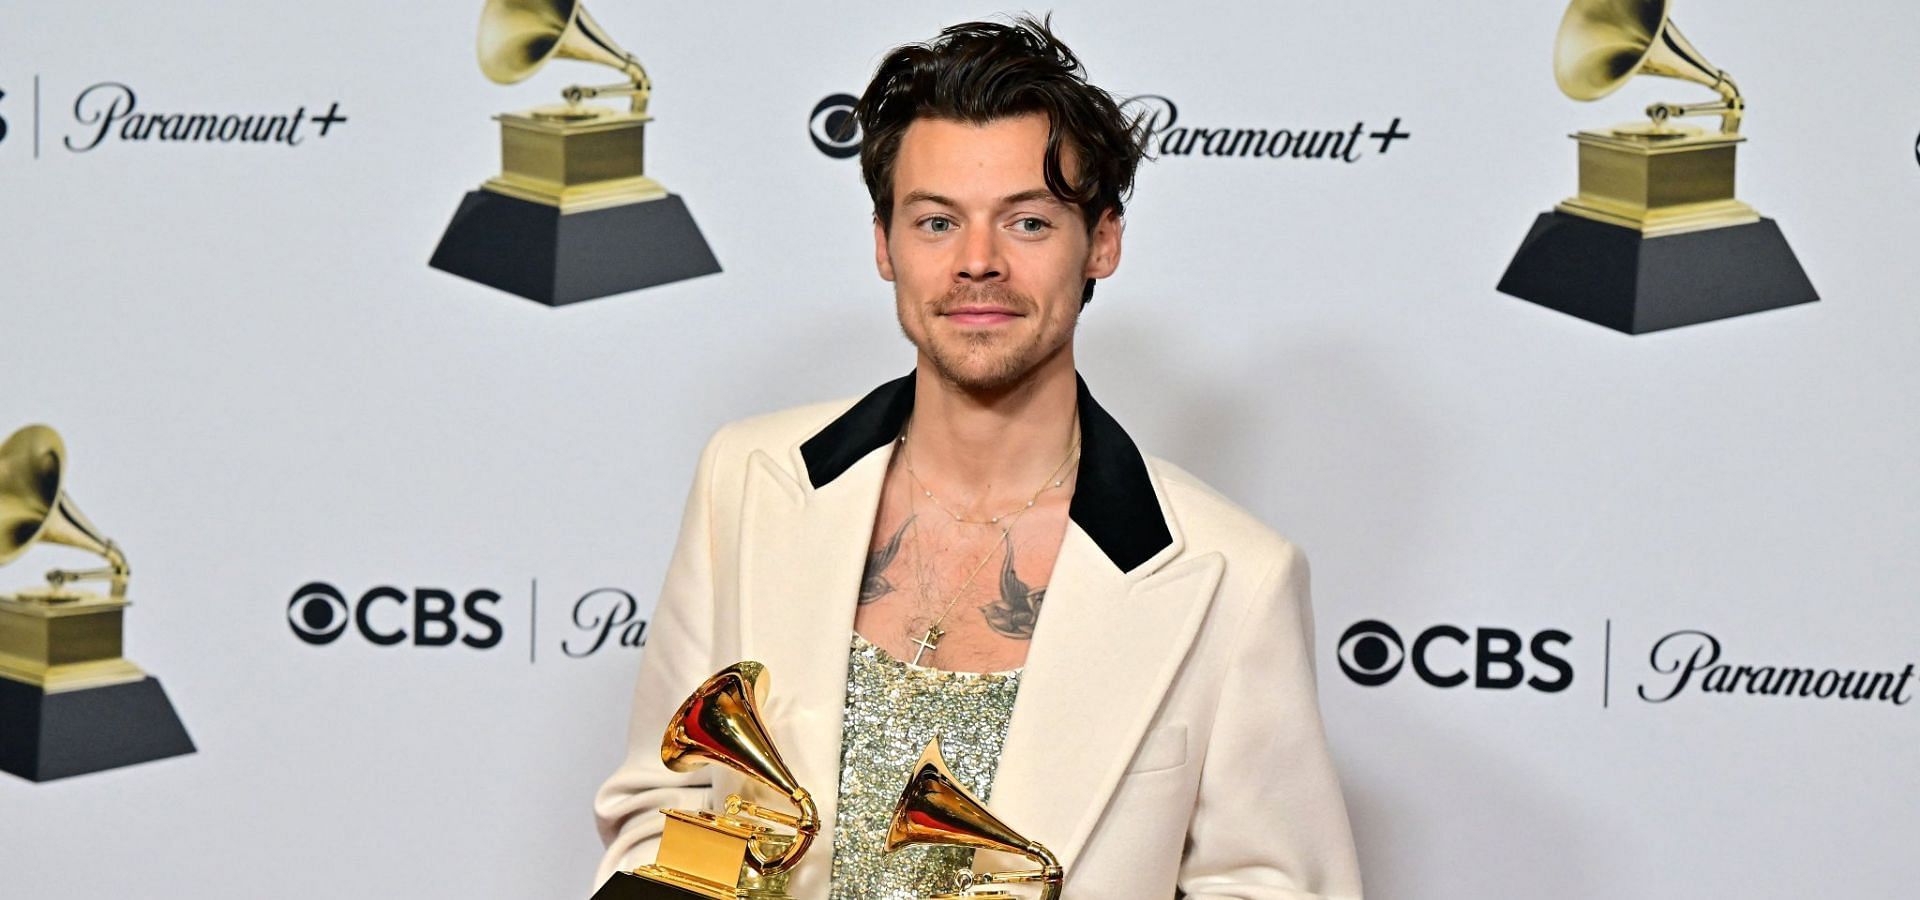 Harry Styles at the 2023 Grammys (Image via Twitter/@hldaily)